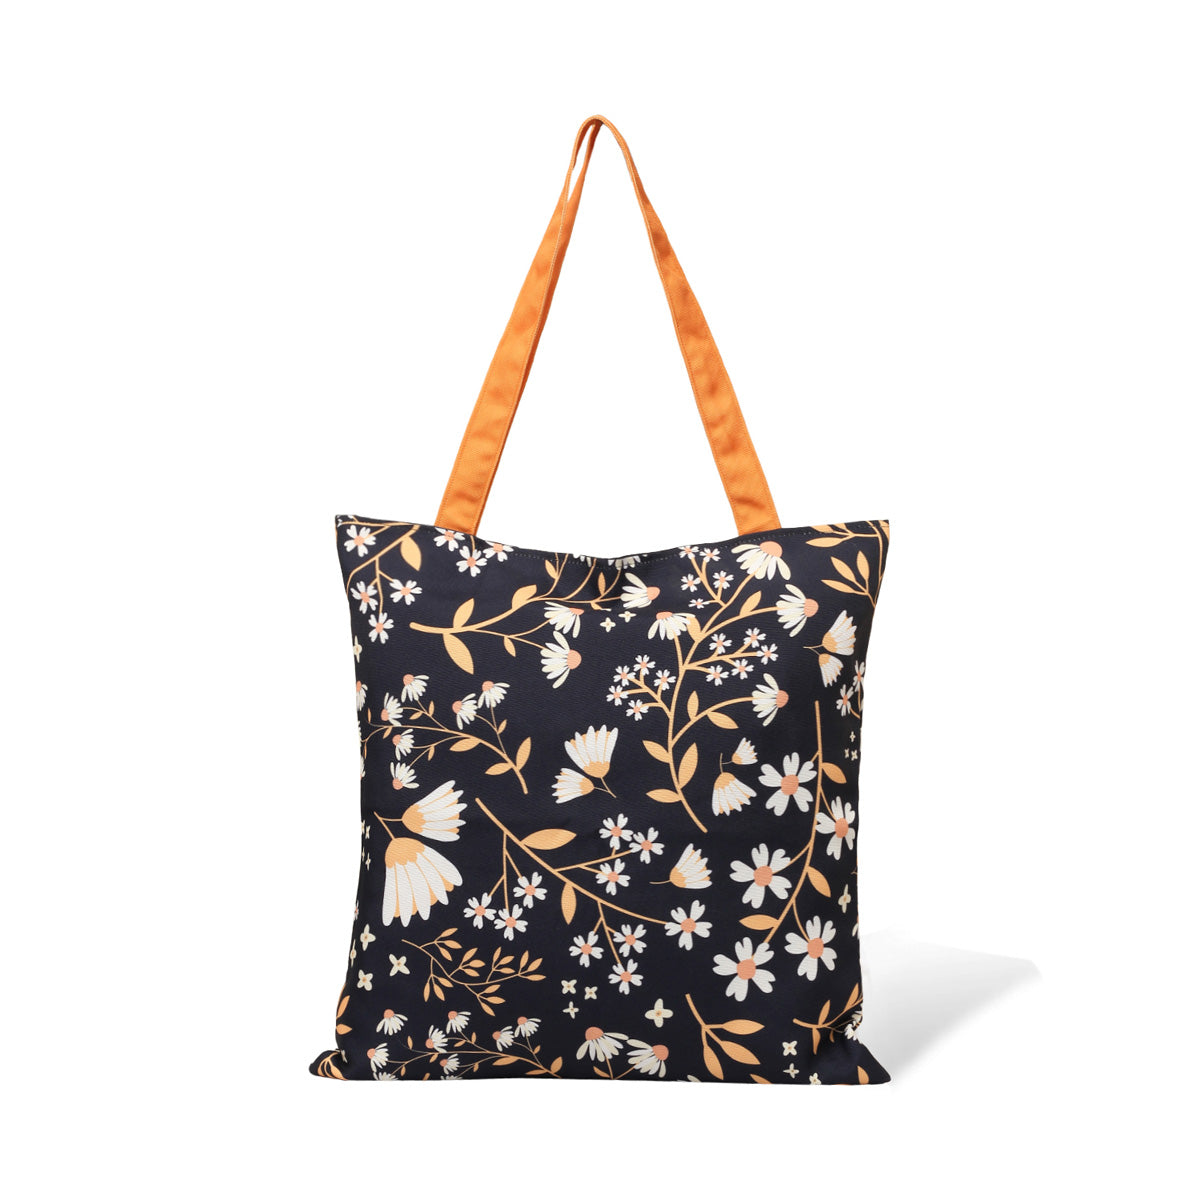 A stylish tote bag adorned with flowers and bright orange handles.